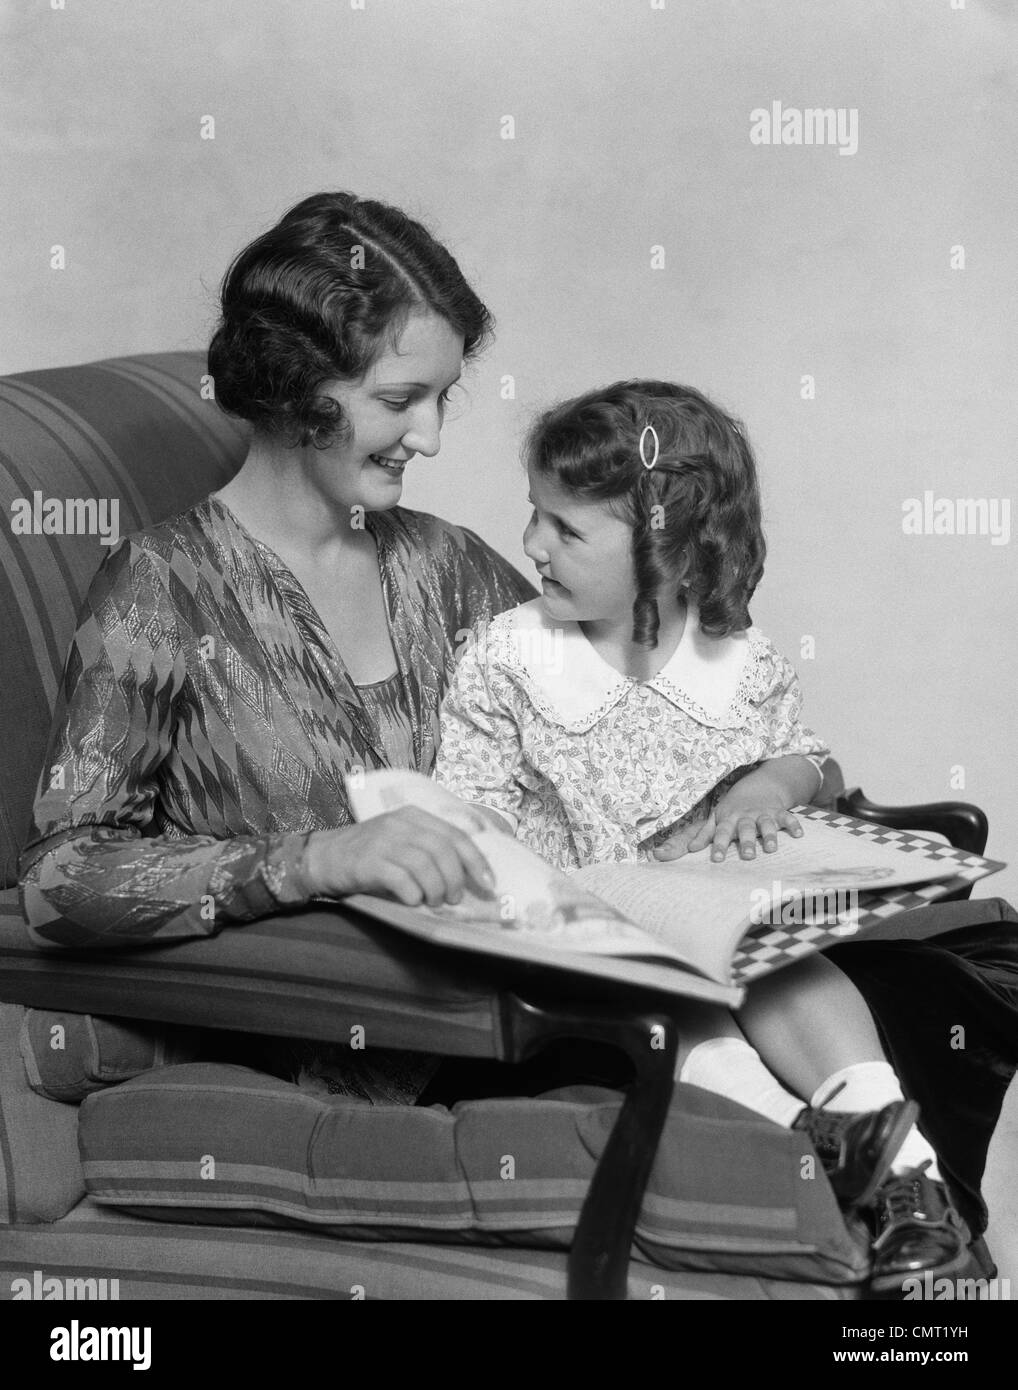 1920s 1930s MOTHER & DAUGHTER SMILING SITTING IN CHAIR READING BOOK Stock Photo